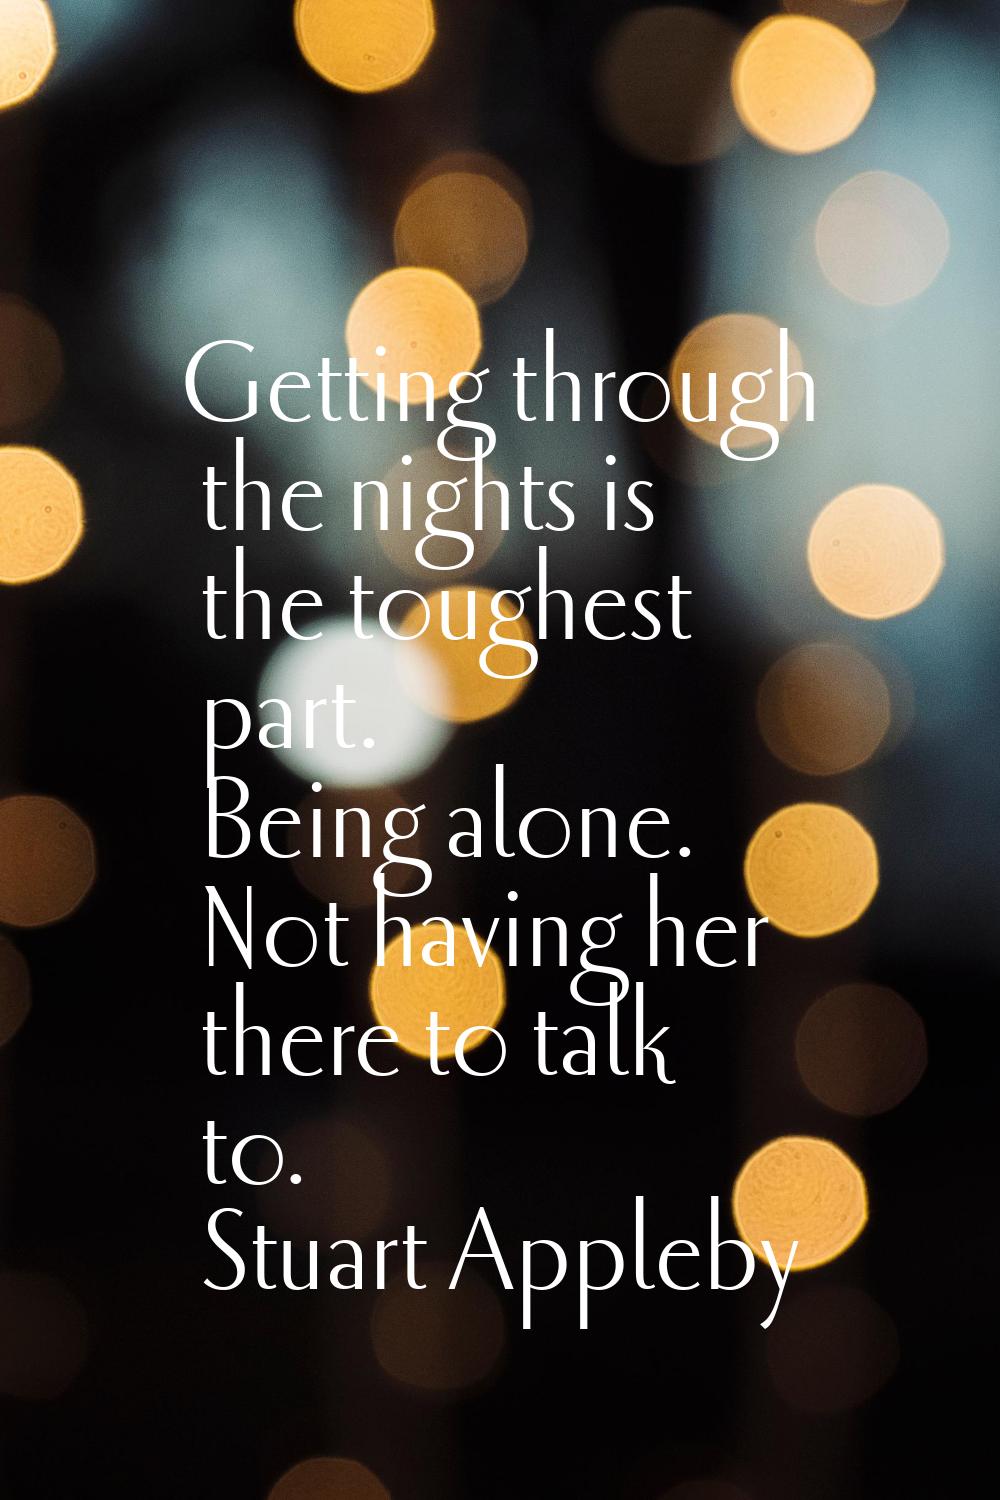 Getting through the nights is the toughest part. Being alone. Not having her there to talk to.